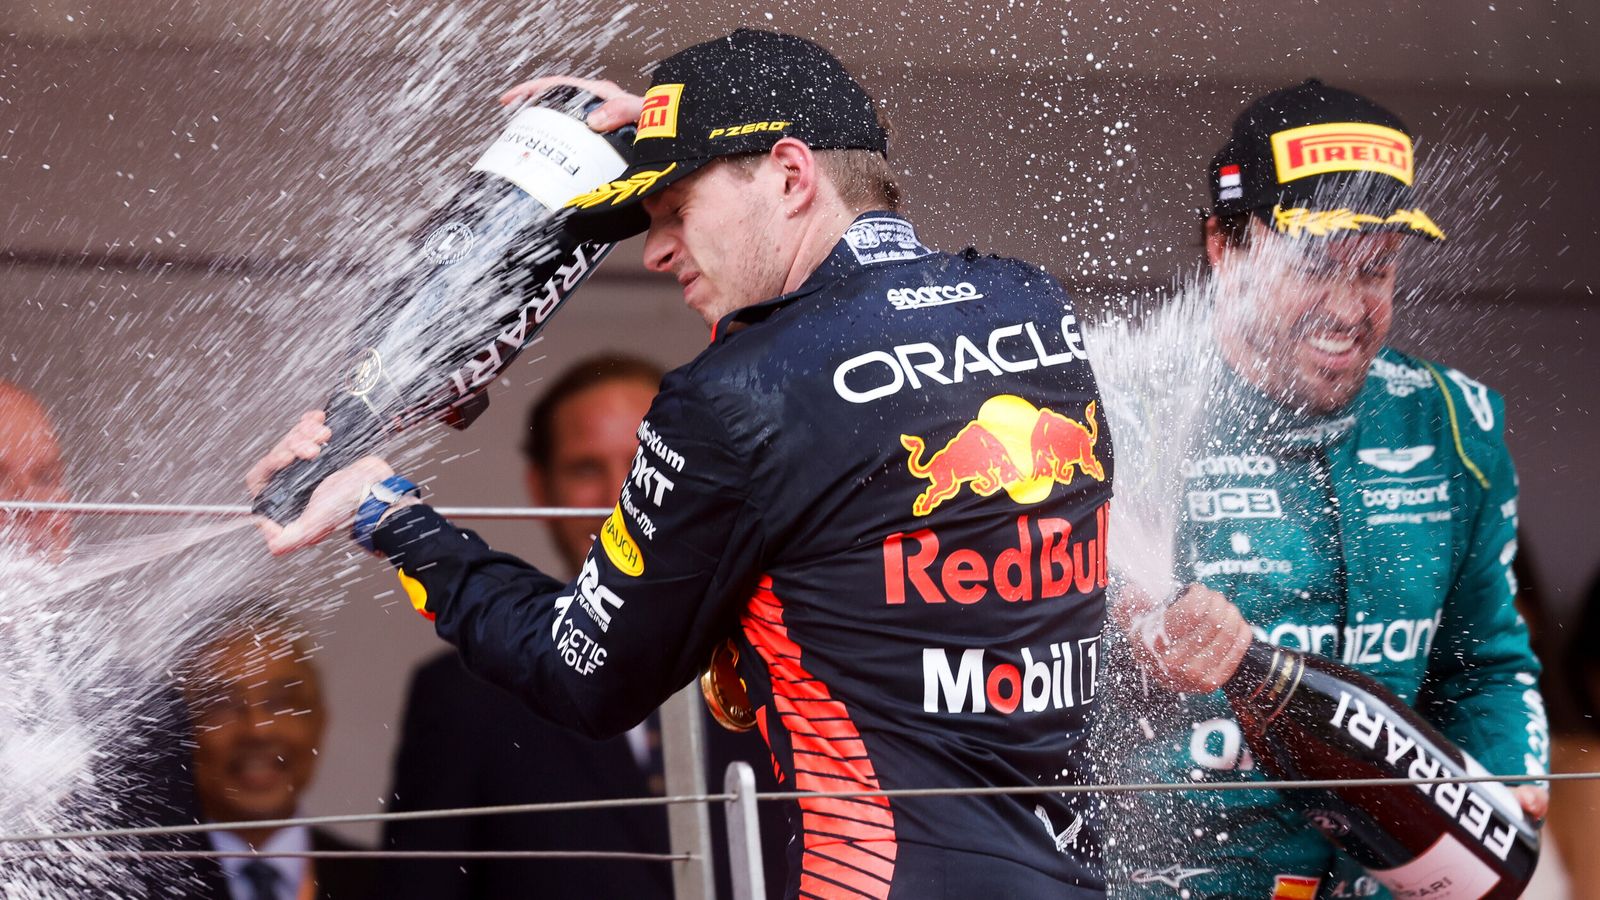 Martin Brundle reviews the Monaco GP's sensational qualifying and Max Verstappen's masterful win in the wet